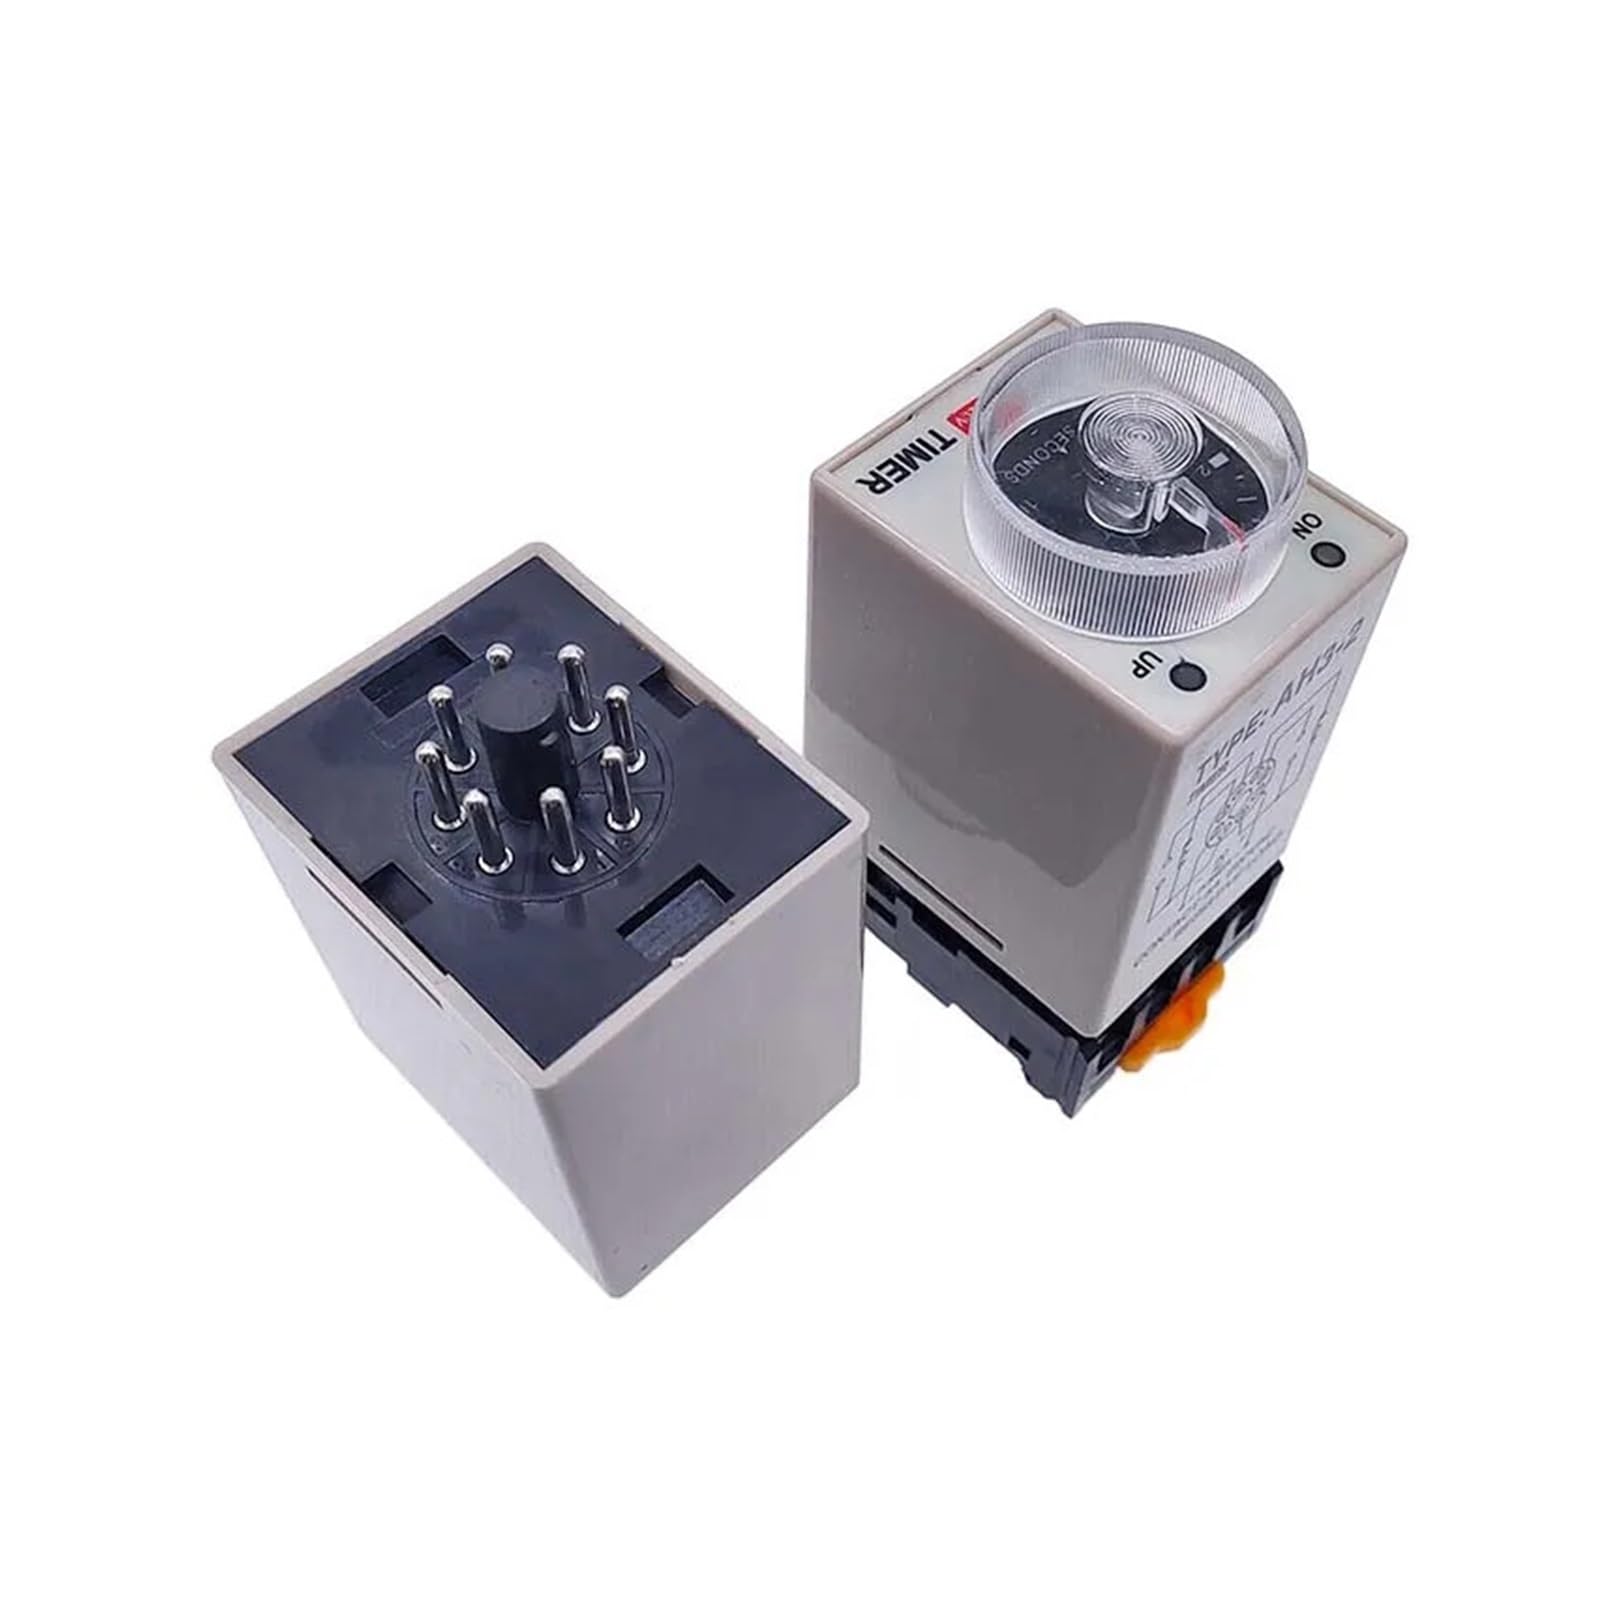 1 PC AH3-2 Power-on Delay Timer AH3-3 Time Relay AC Thick Stitch Time Set Range 1S/5S/10S/30S/60S/5M/10M/30M LABDIP(AC220V,AH3-3 0-60Seconds) von LABDIP